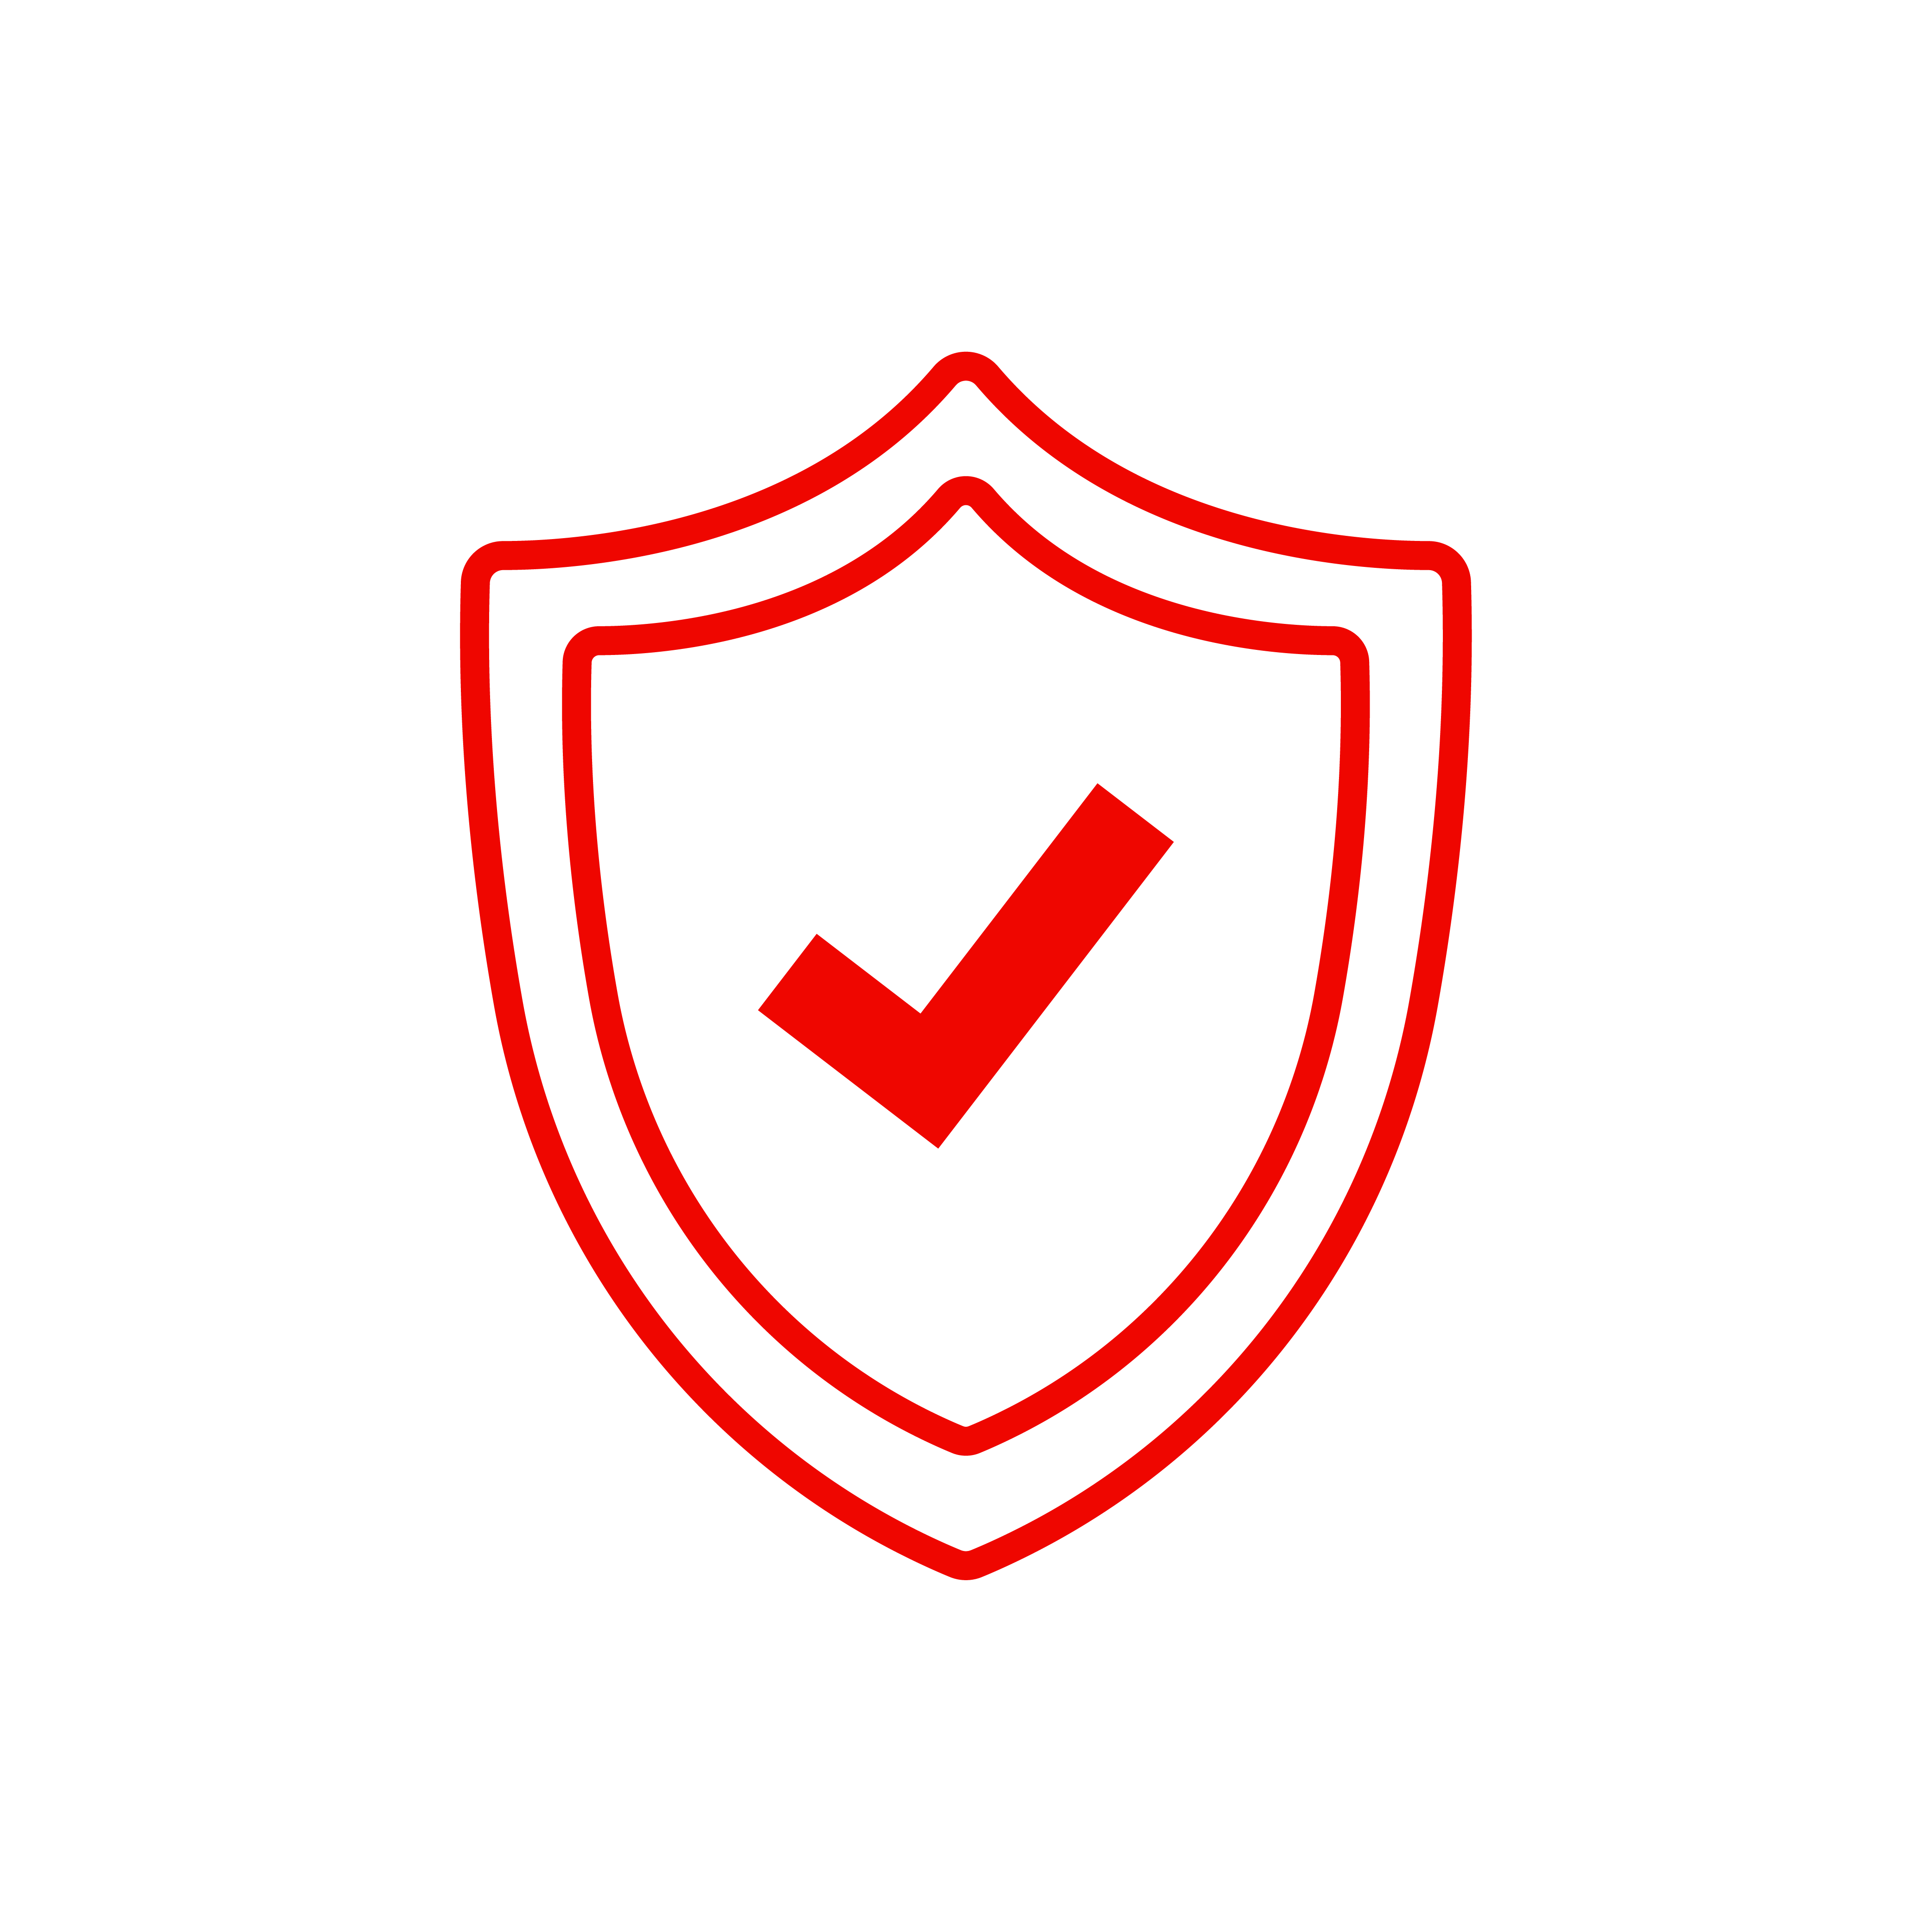 A shield with a checkmark